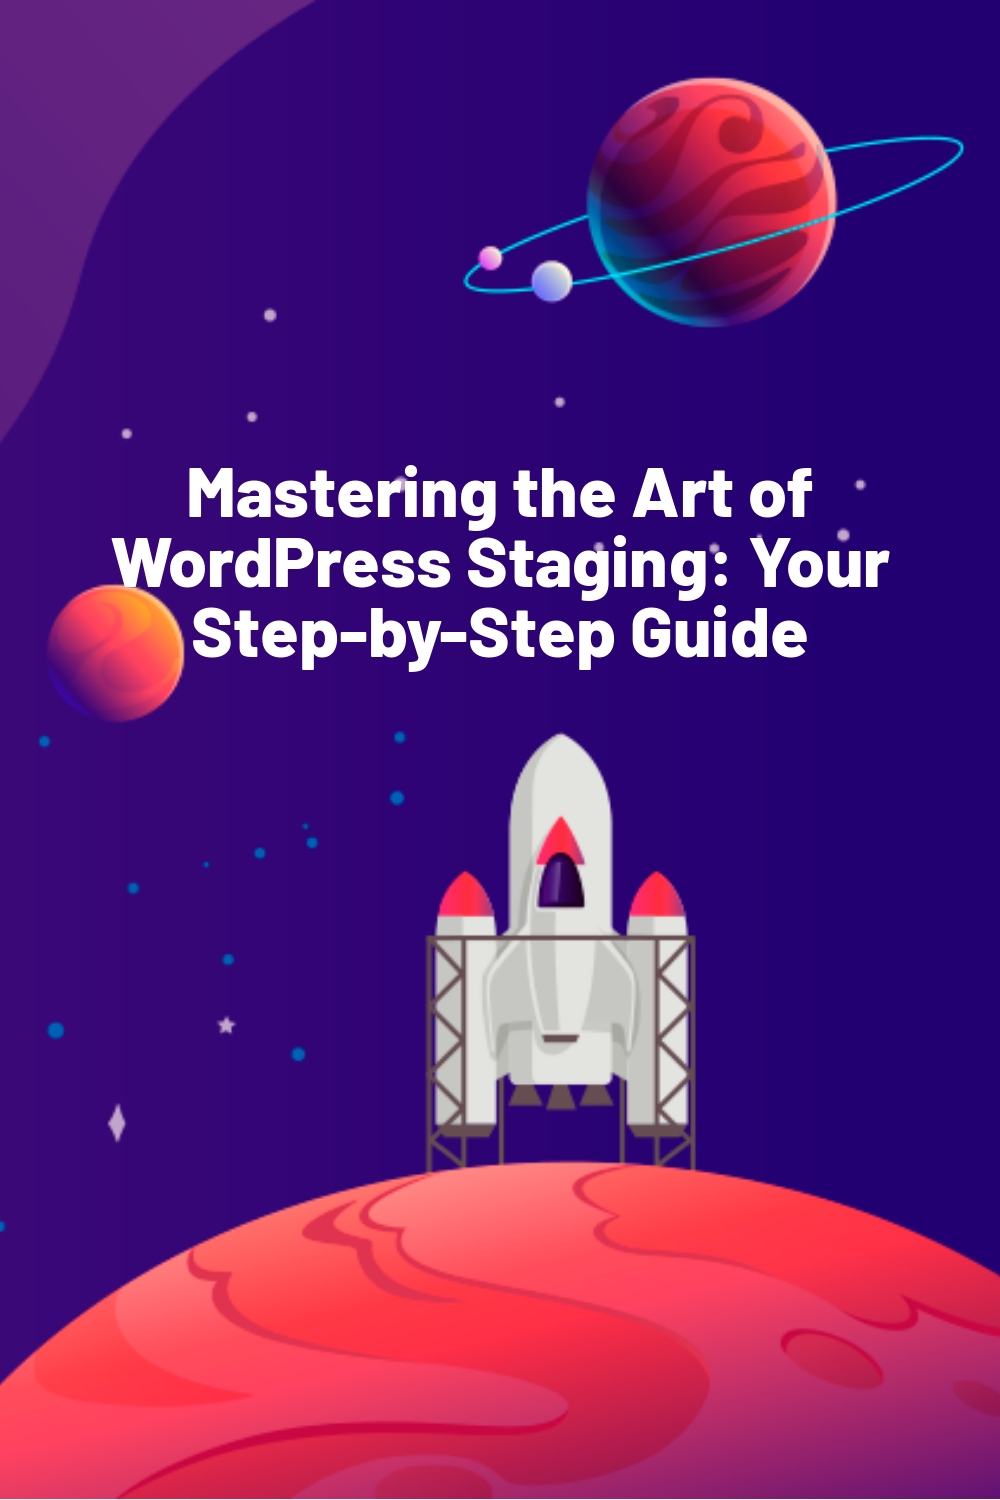 Mastering the Art of WordPress Staging: Your Step-by-Step Guide